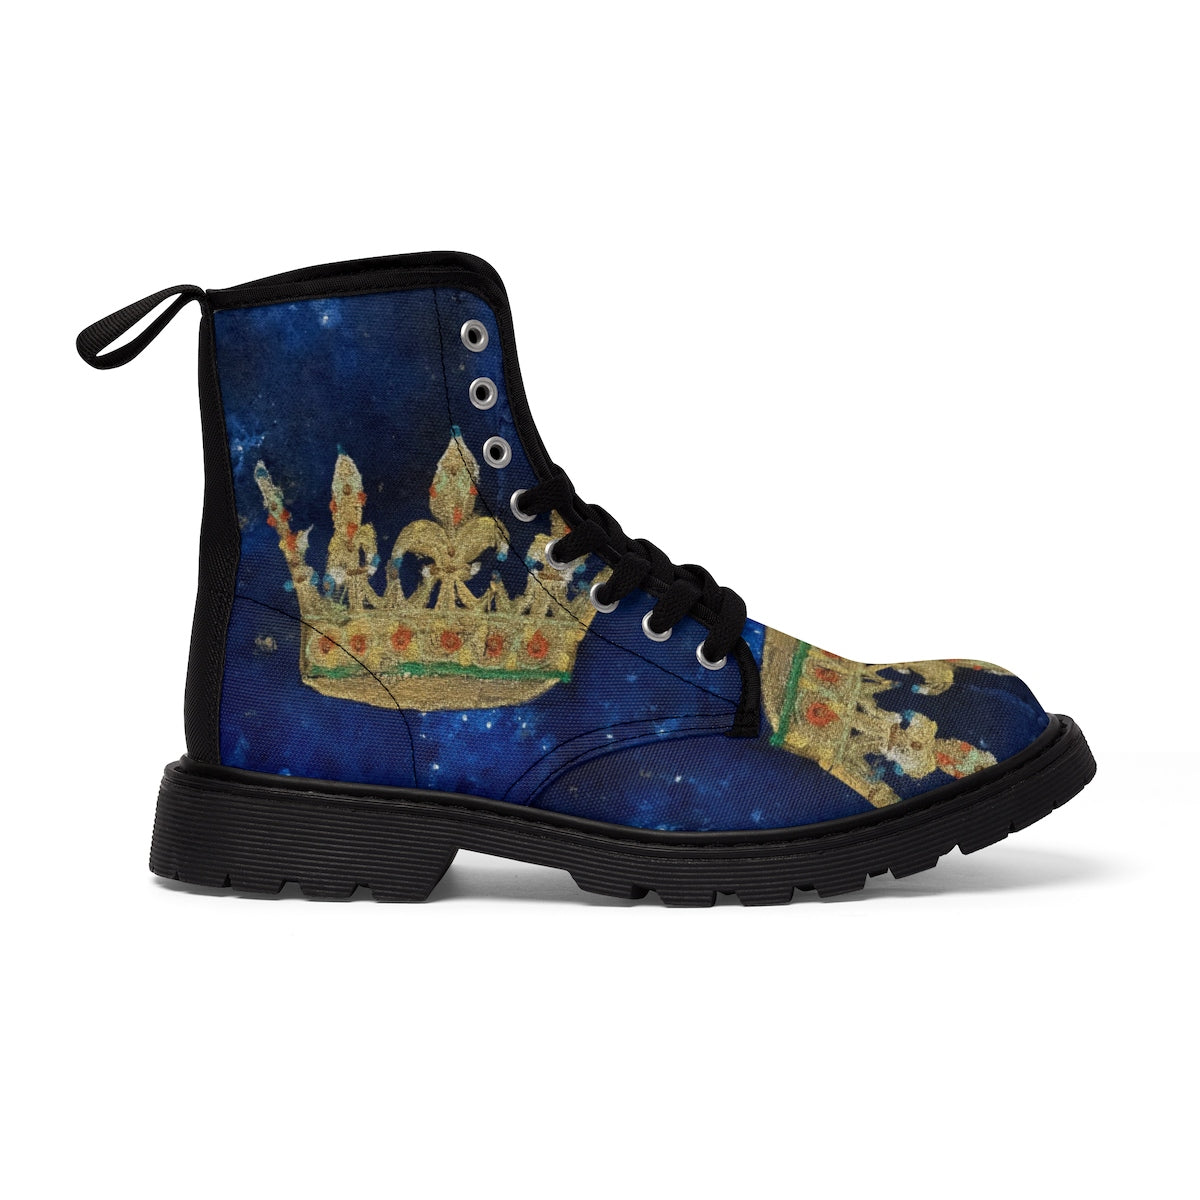 Men's Canvas Boots - Be your own king in your life - centauresse